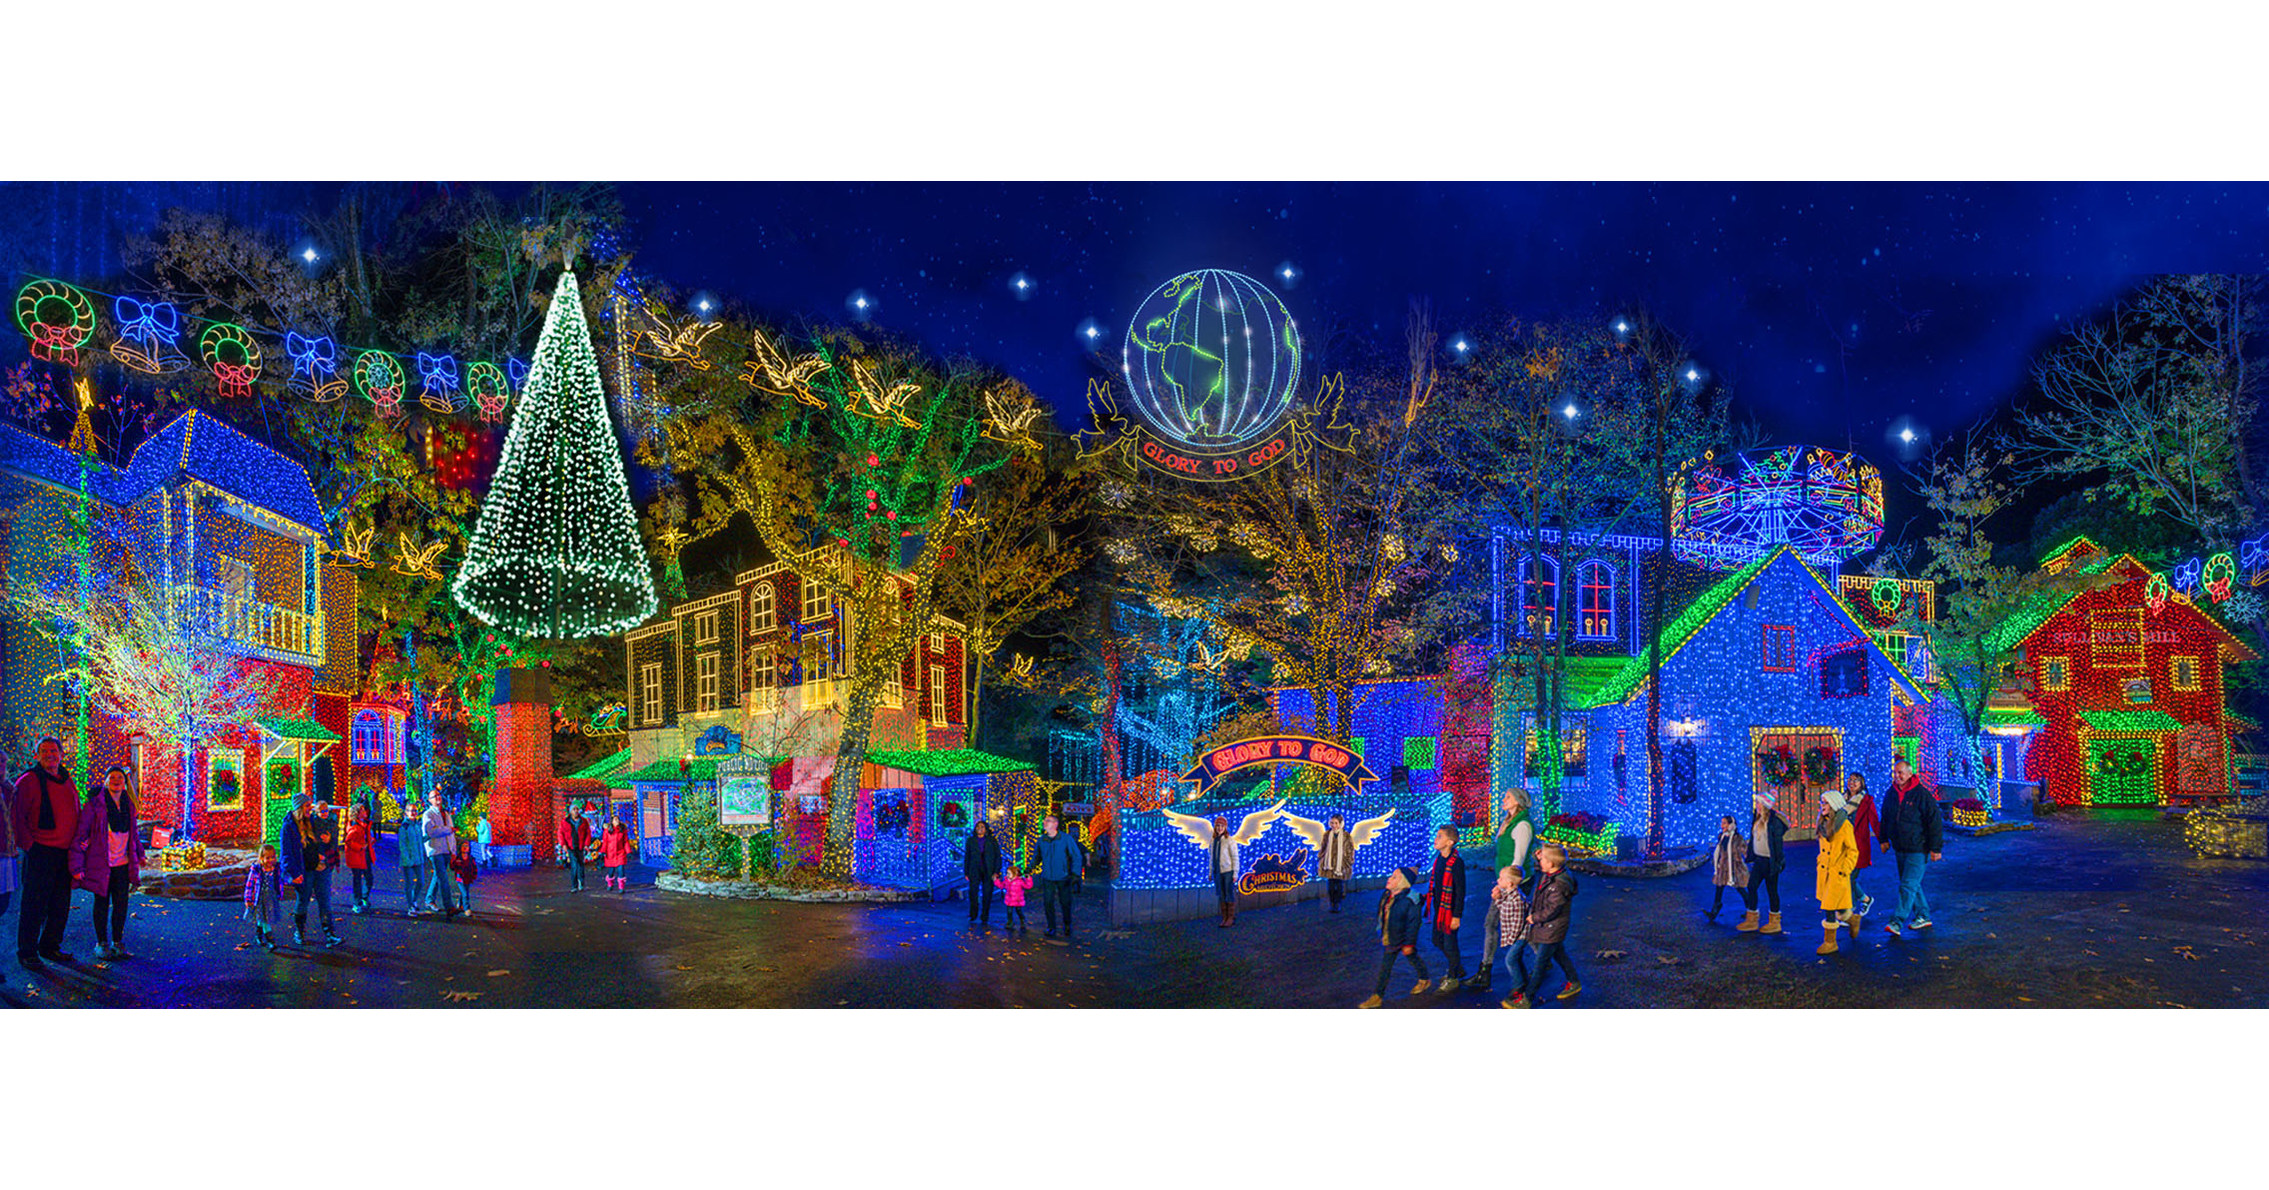 Silver Dollar City's An Old Time Christmas IS America's Best Theme Park